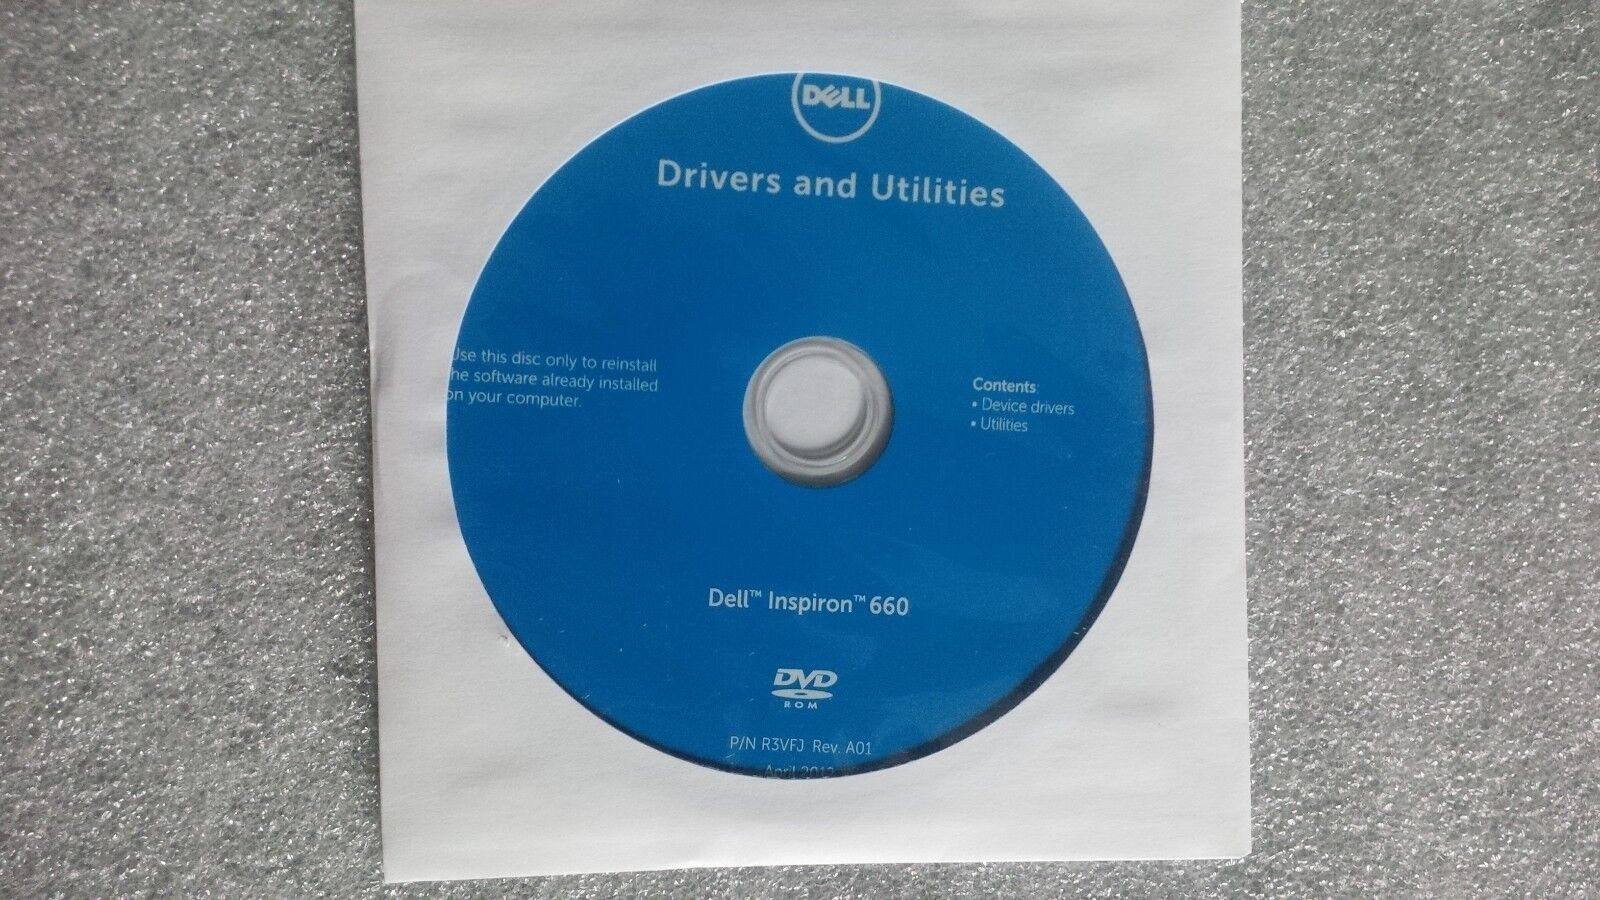 Brand New Sealed Dell Drivers and Utilities Inspiron 660 Resource CD 0NF7NW